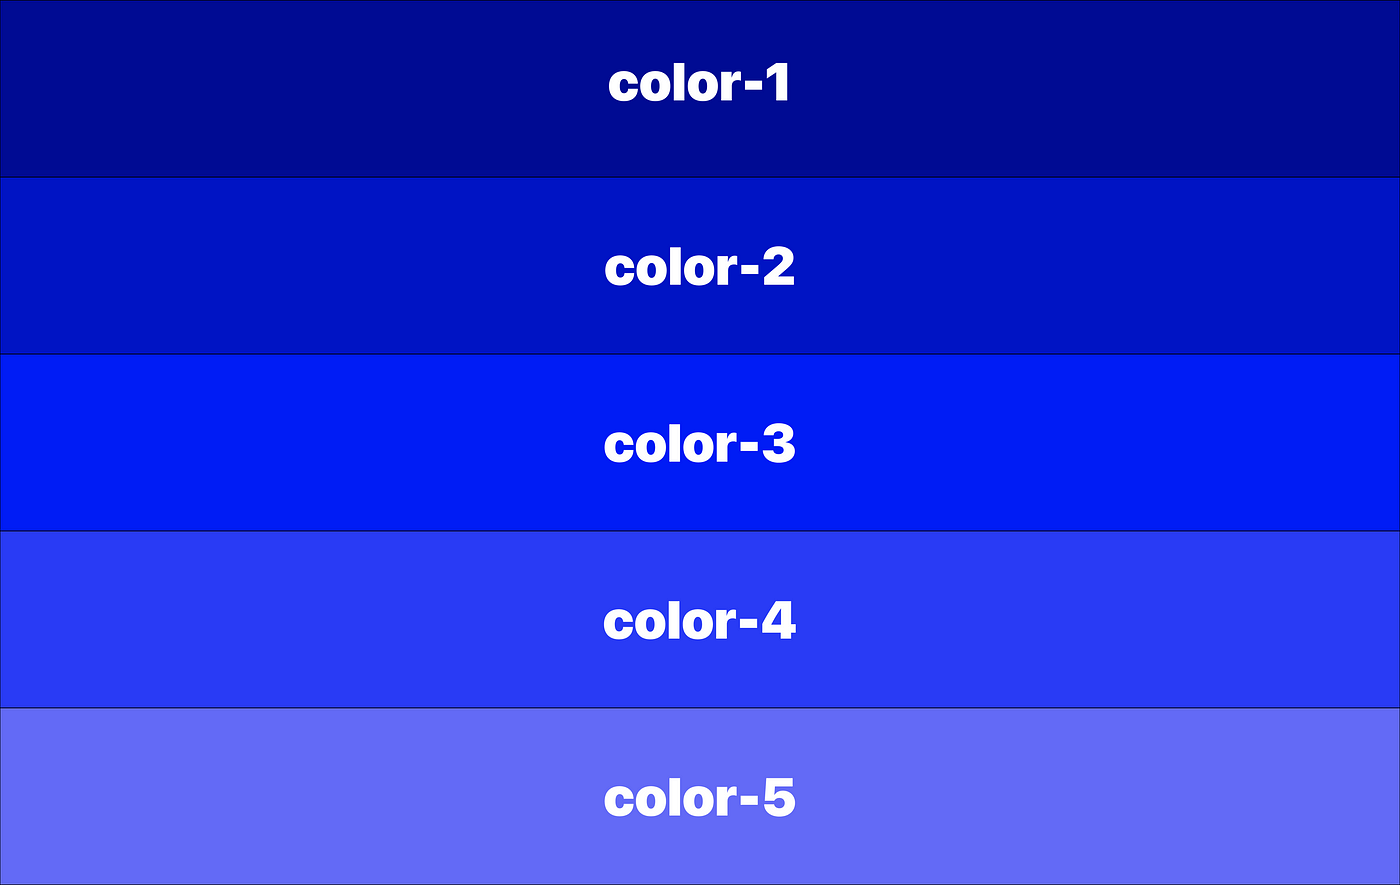 Los Angeles Lakers Color Codes Hex, RGB, and CMYK - Team Color Codes